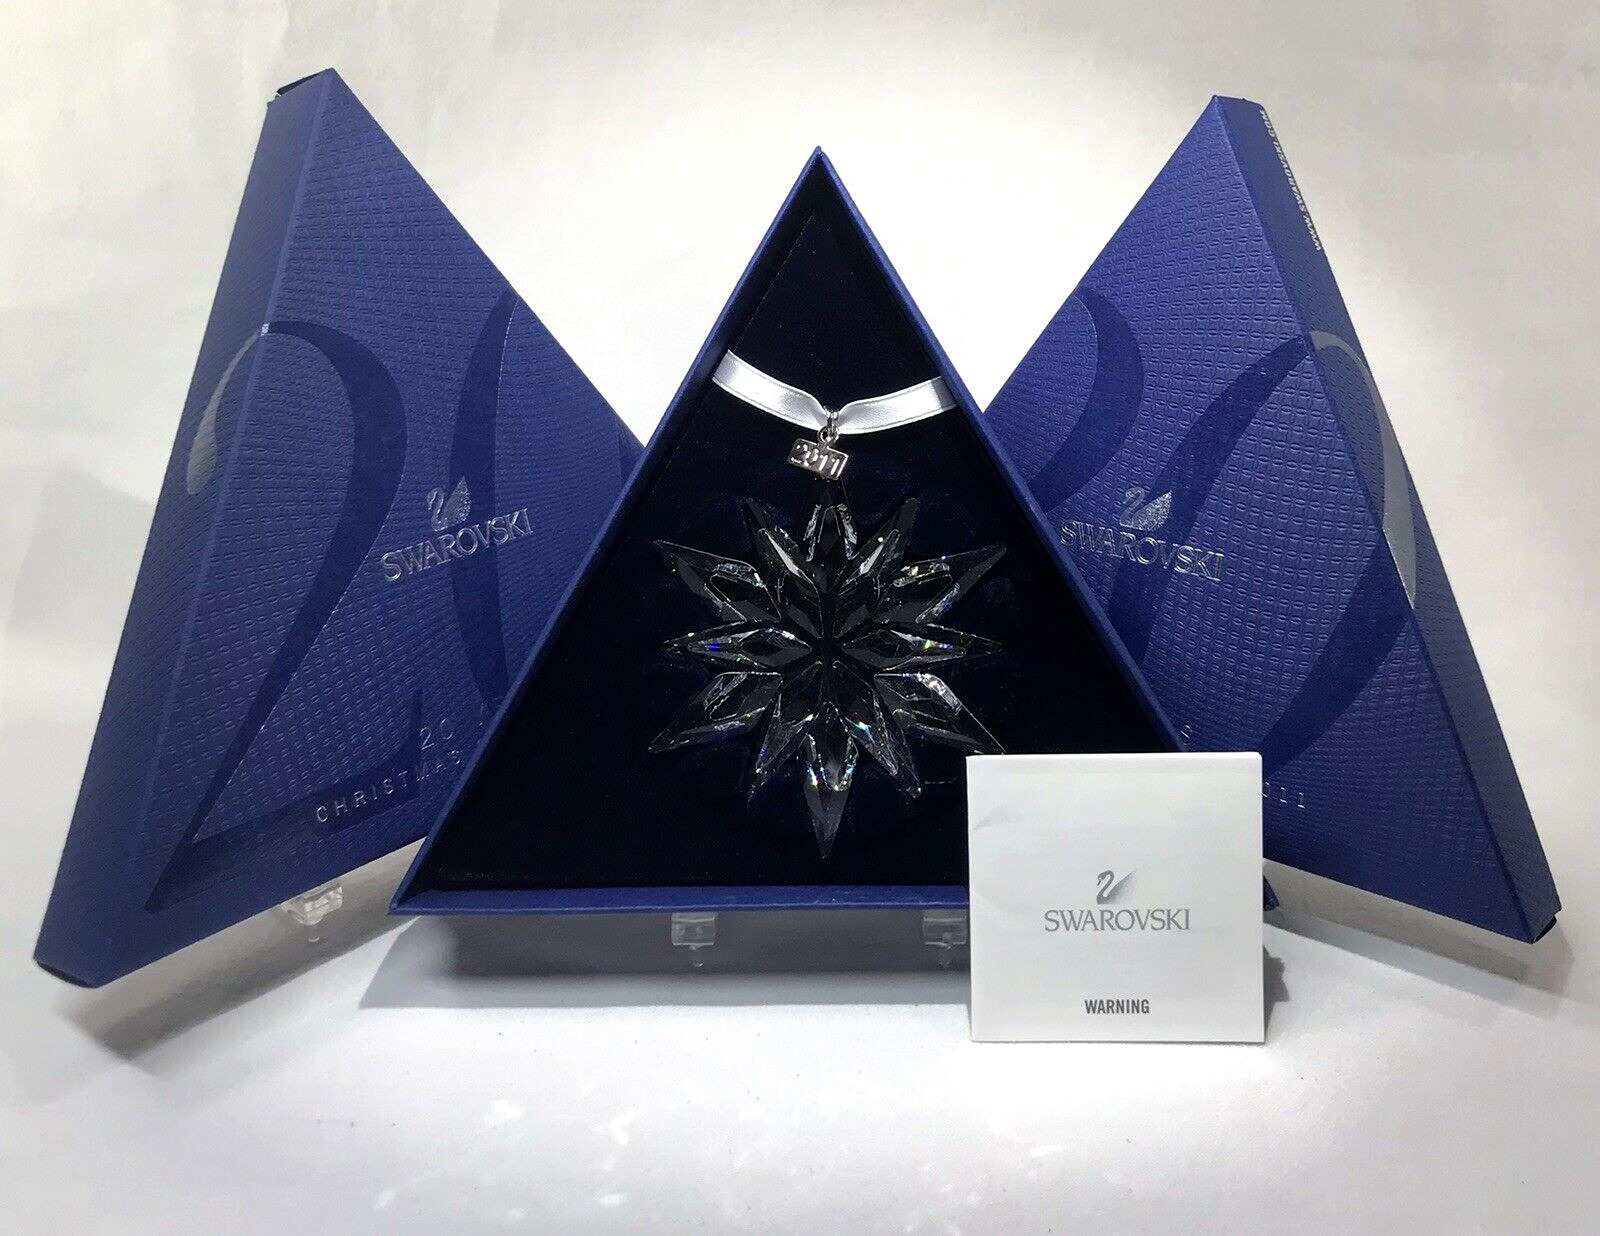 SWAROVSKI 2011 ANNUAL EDITION LARGE CLEAR ORNAMENT 20th - AUTHENTIC *BRAND NEW*